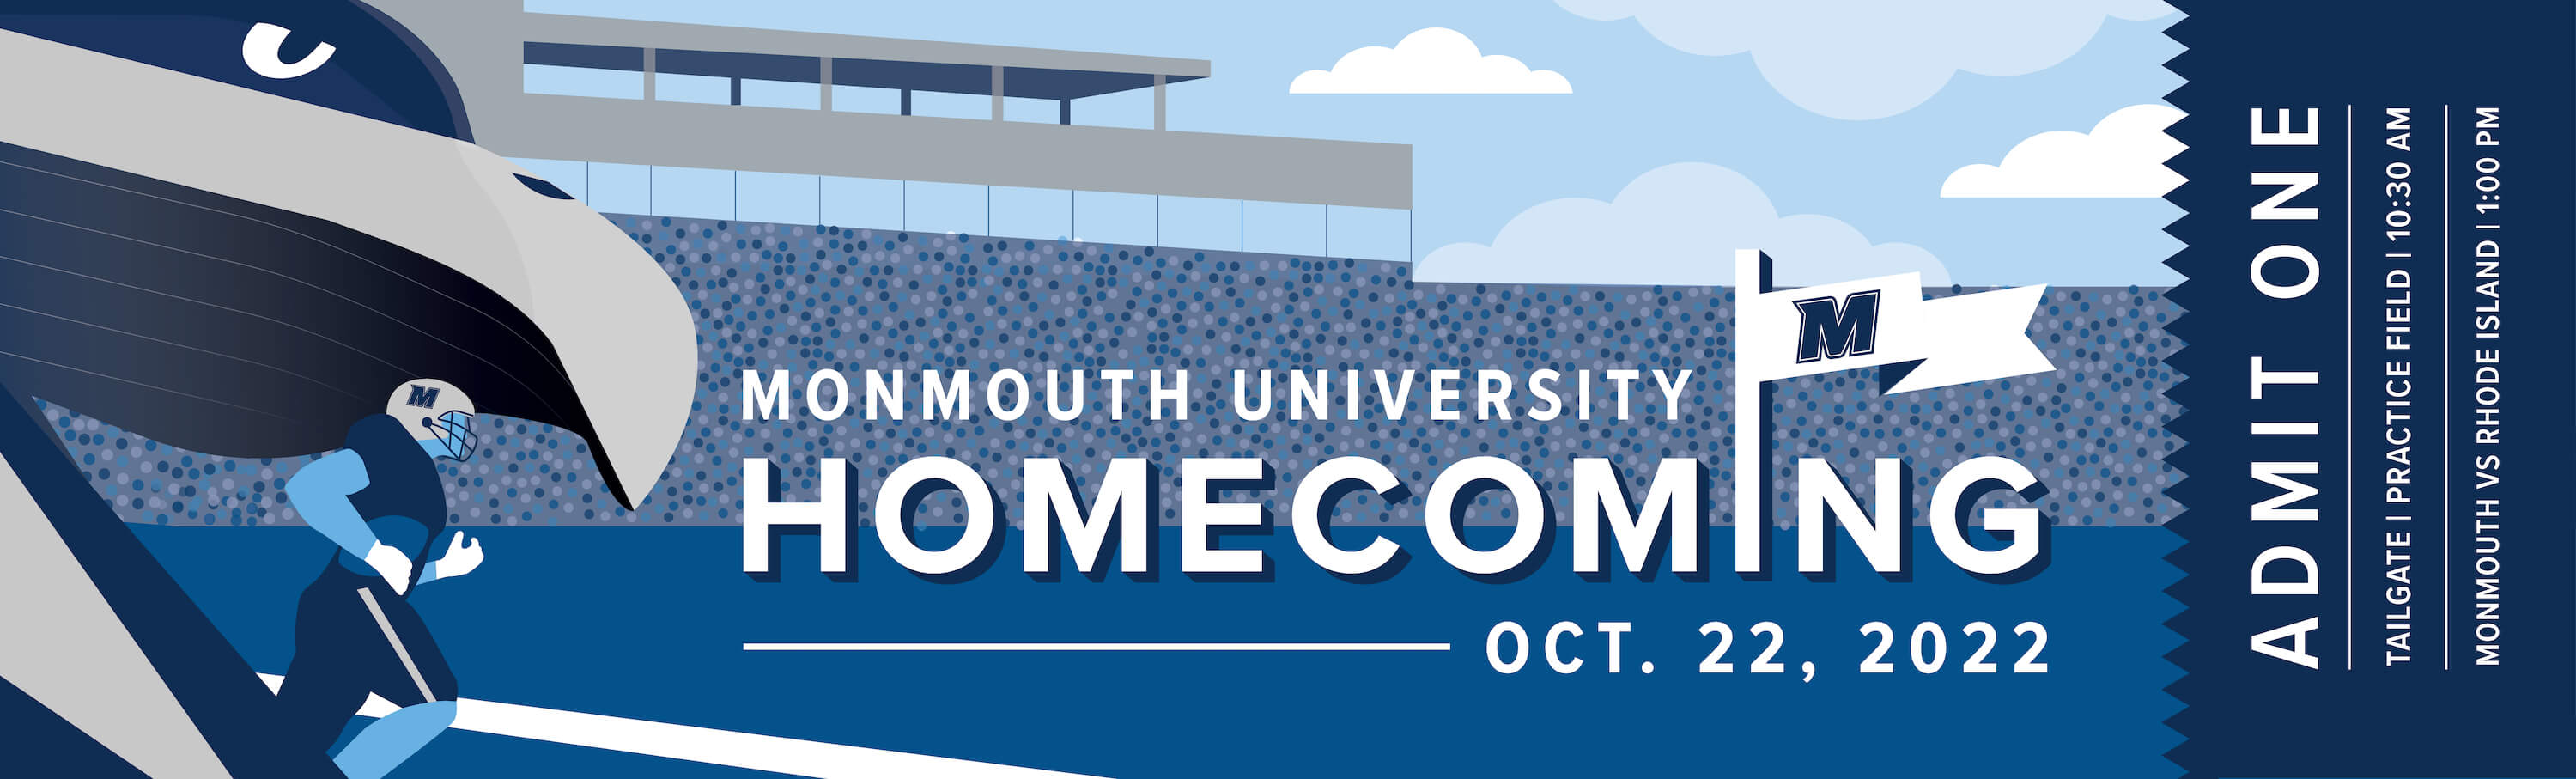 Monmouth University Homecoming, Oct. 22, 2022. Admit One: Tailgate at the Practice Field, 10:30 a.m. Monmouth vs. Rhode Island, 1 p.m.